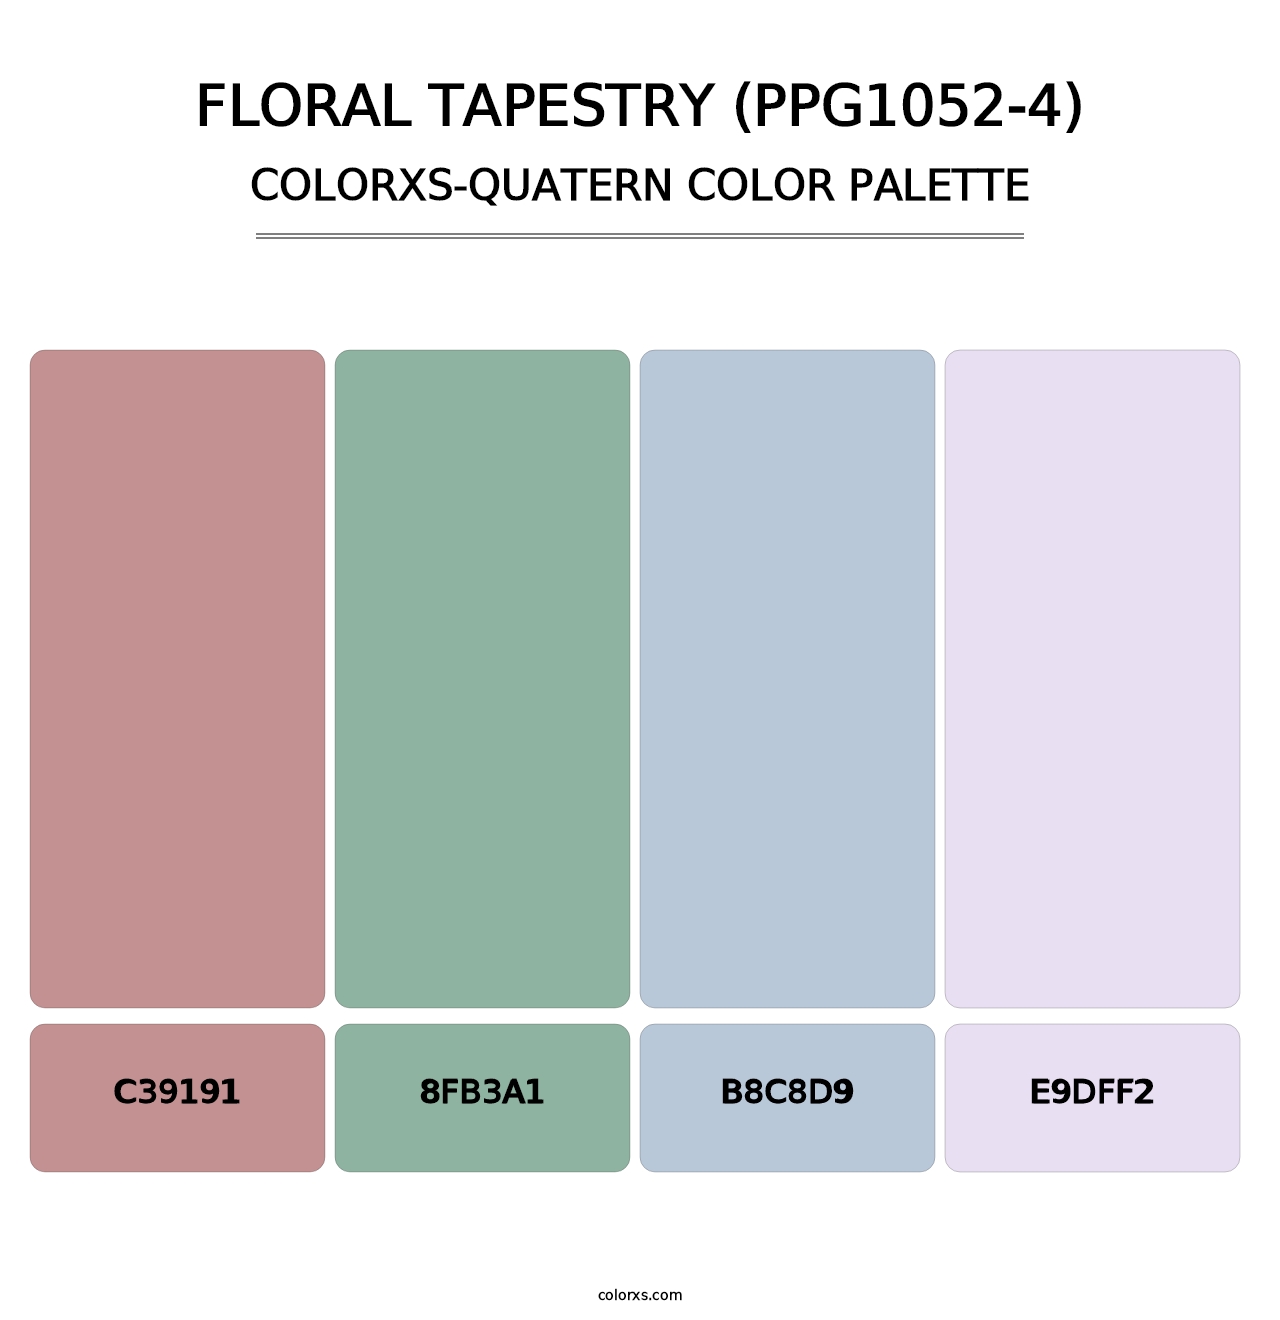 Floral Tapestry (PPG1052-4) - Colorxs Quatern Palette